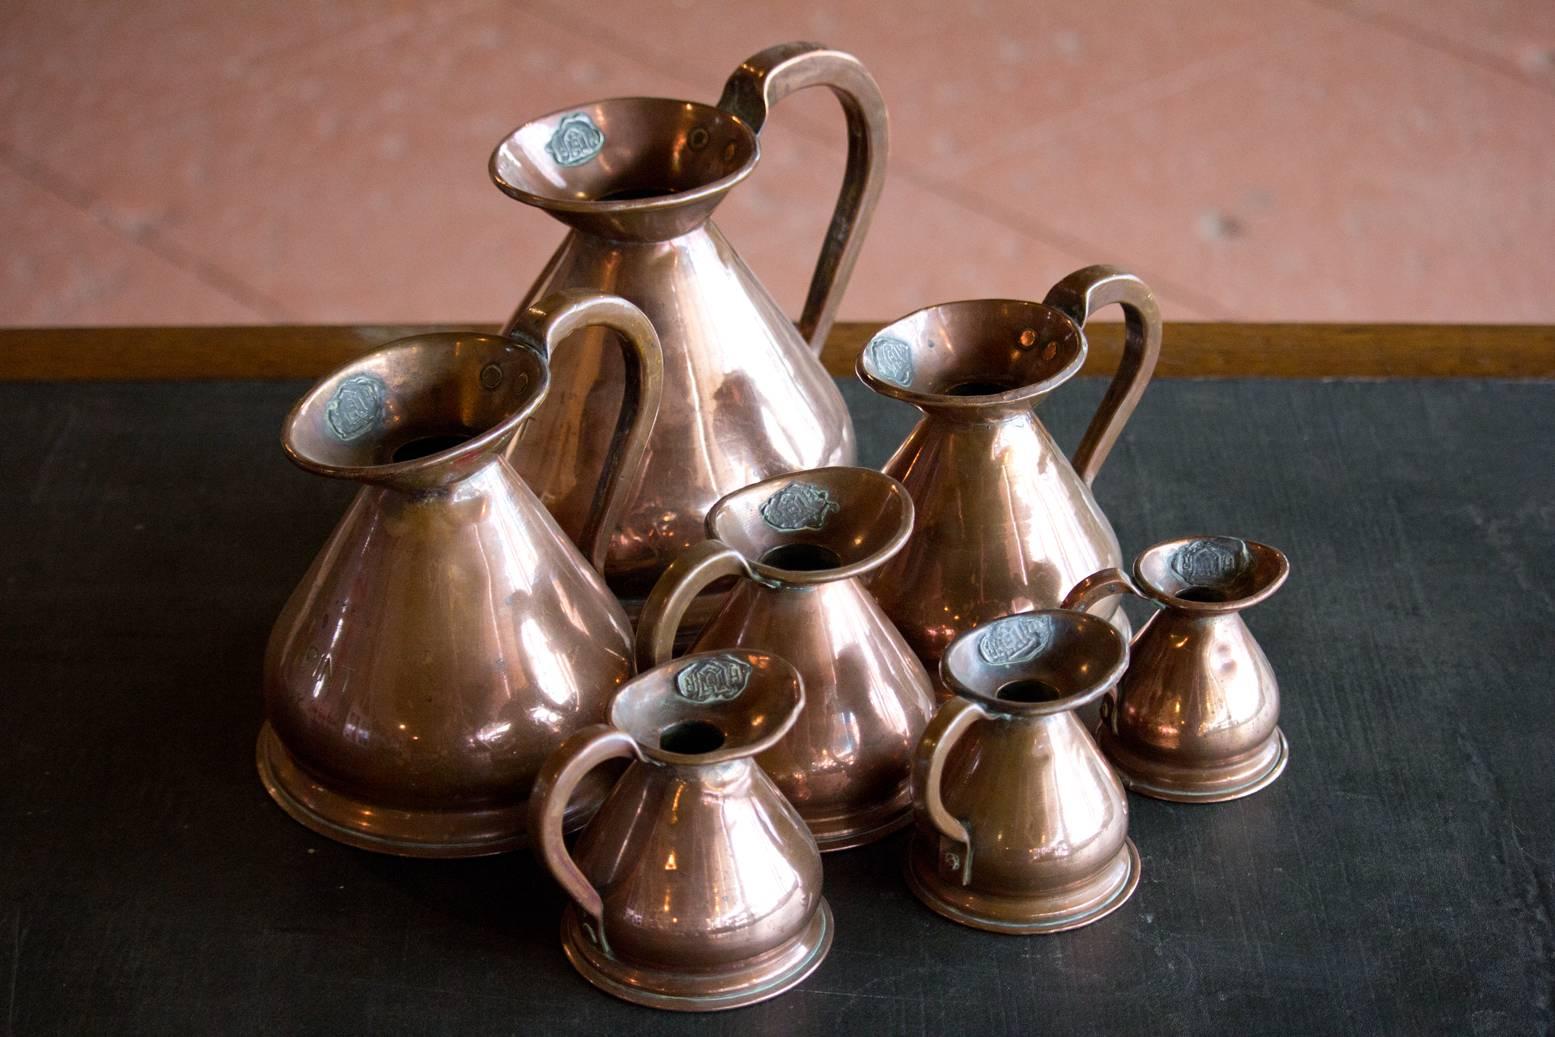 Set of seven antique graduated copper jugs from 1/8th of a gill to 1 quart. These jugs were used to measure ales, ciders and spirits in old British inns. They have a lead H R seal which was applied by Customs and Excise to ensure the inn owner was